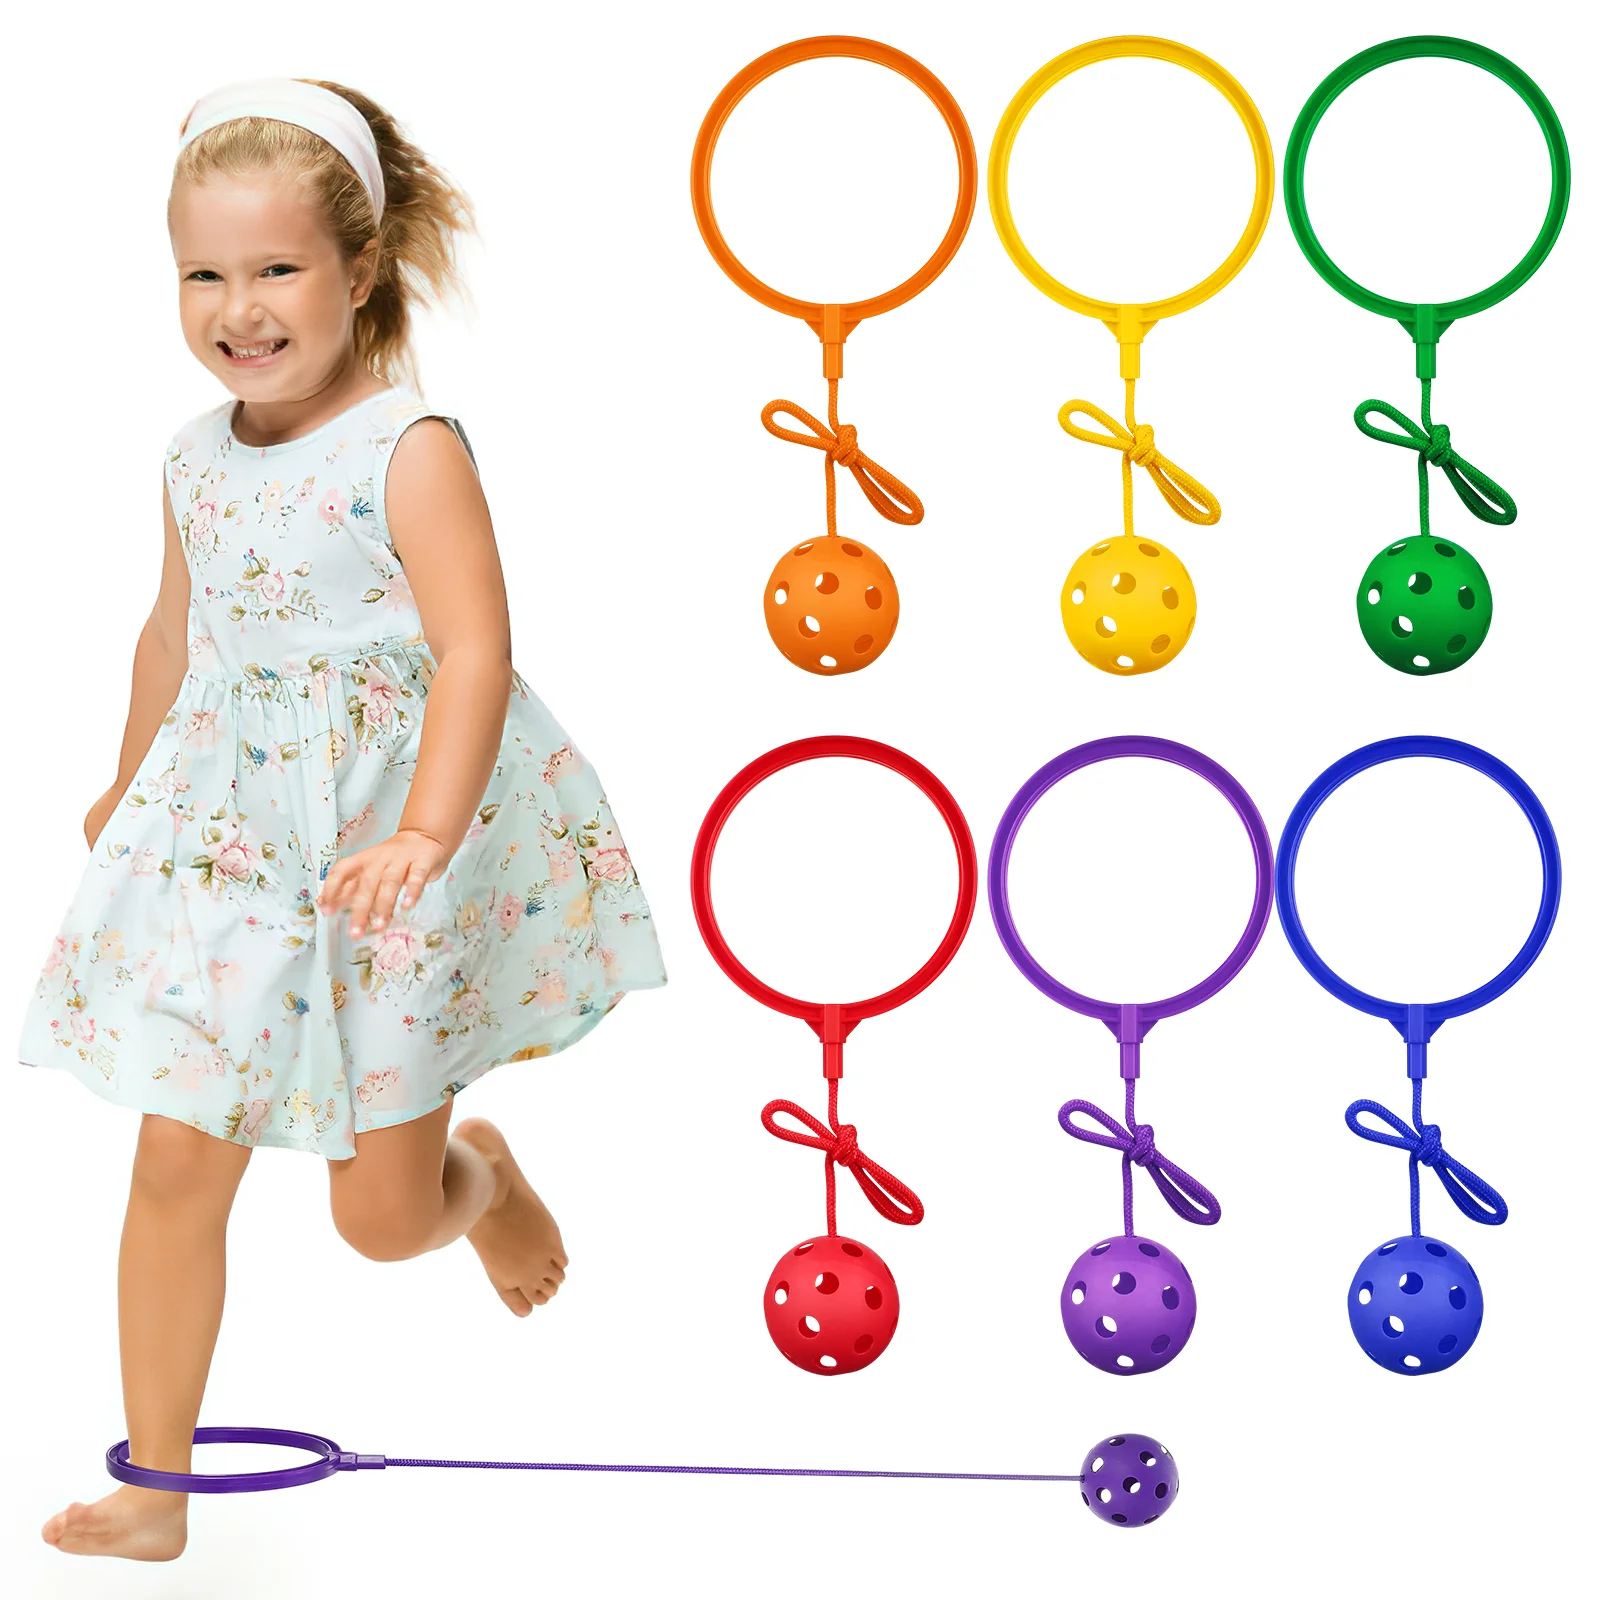 

6pcs Sports Set Kids Ankle Jumping Ring Children Jumping It Fitness Sports for Party Activities Game Supplies